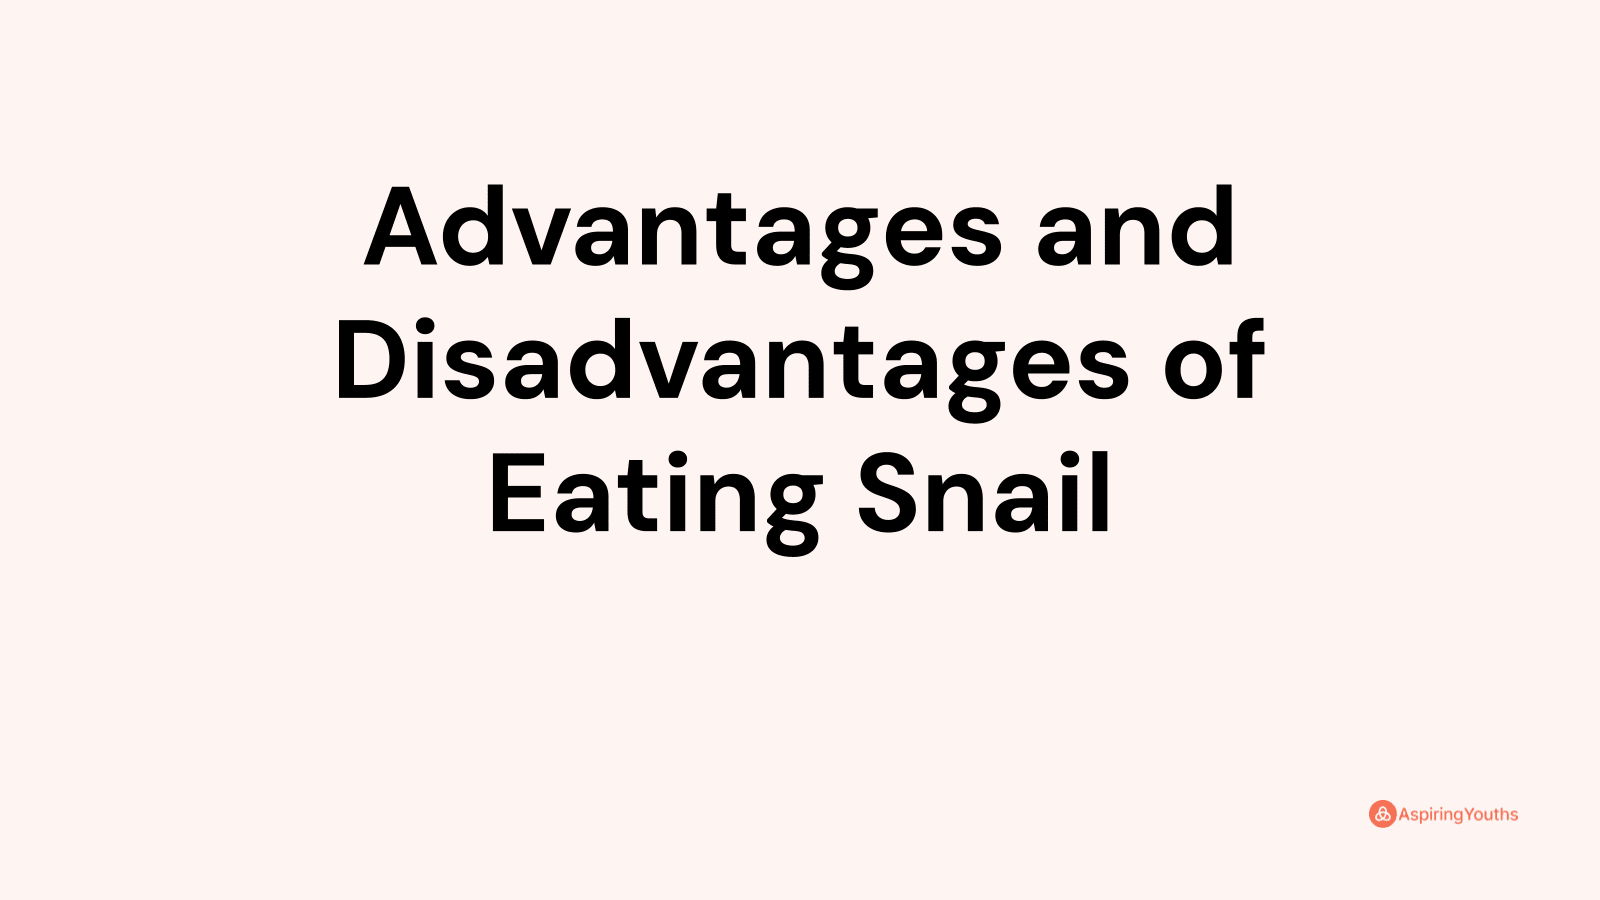 Advantages and disadvantages of Eating Snail